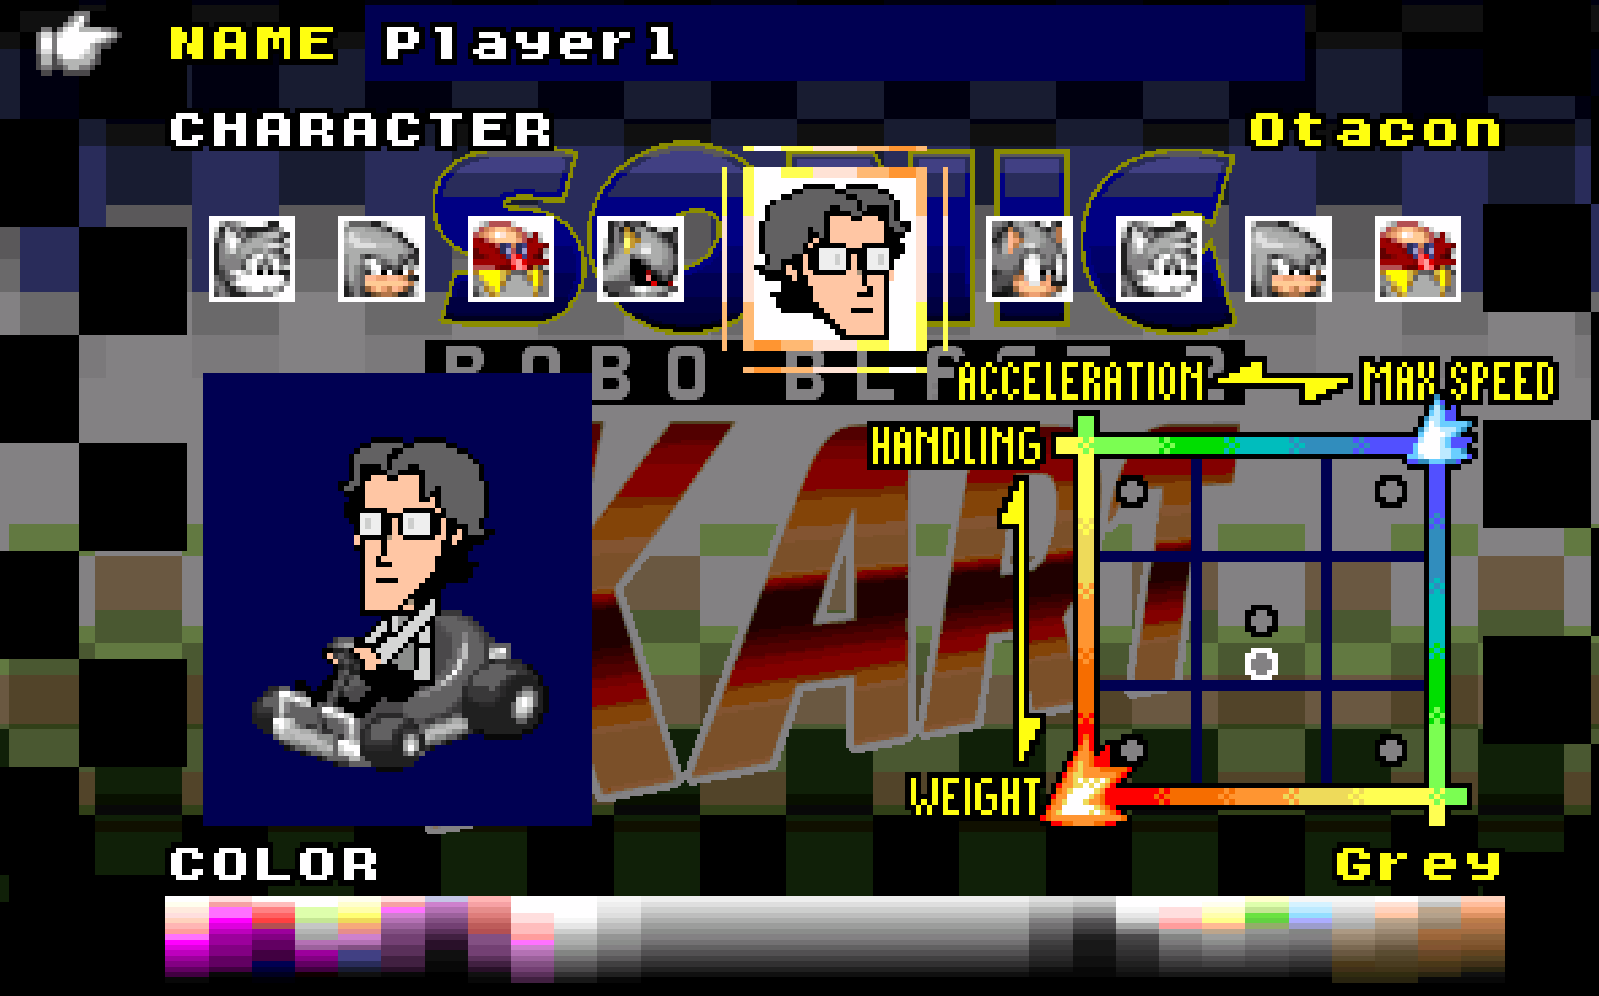 1otacon select.png